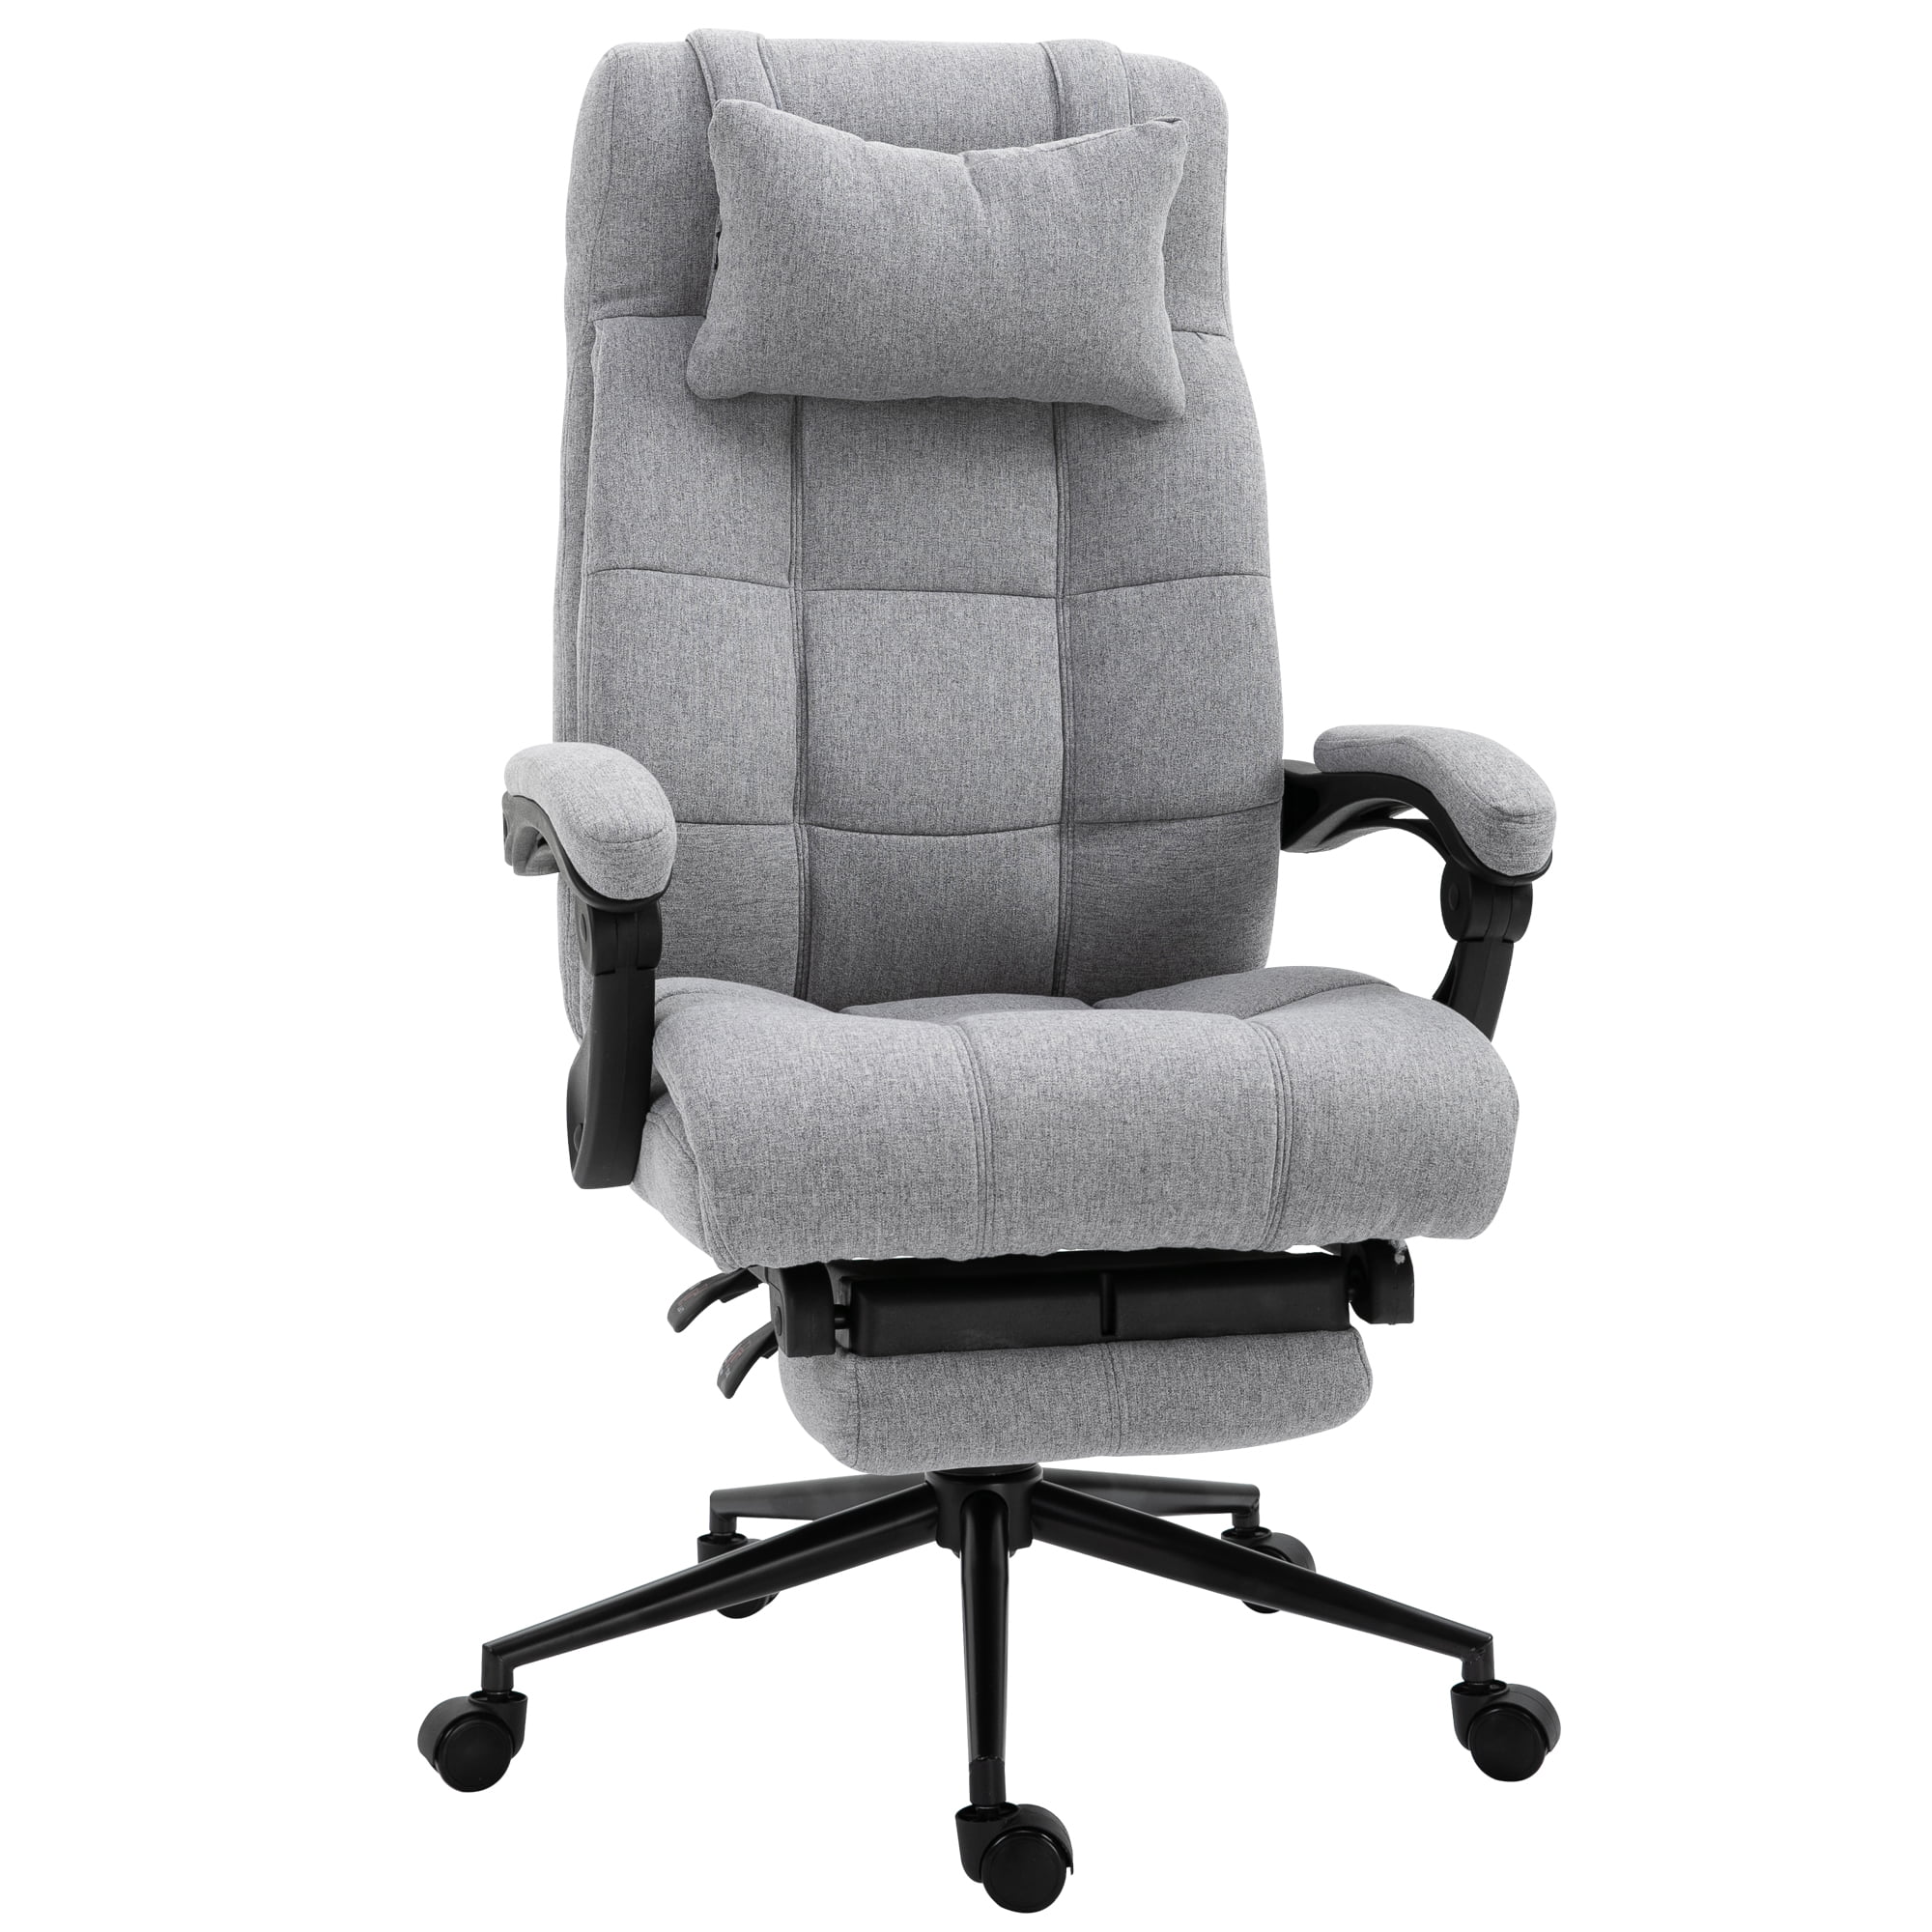 Best Modern Home Office Chair ~ Comfortable Chairs | Bodenowasude